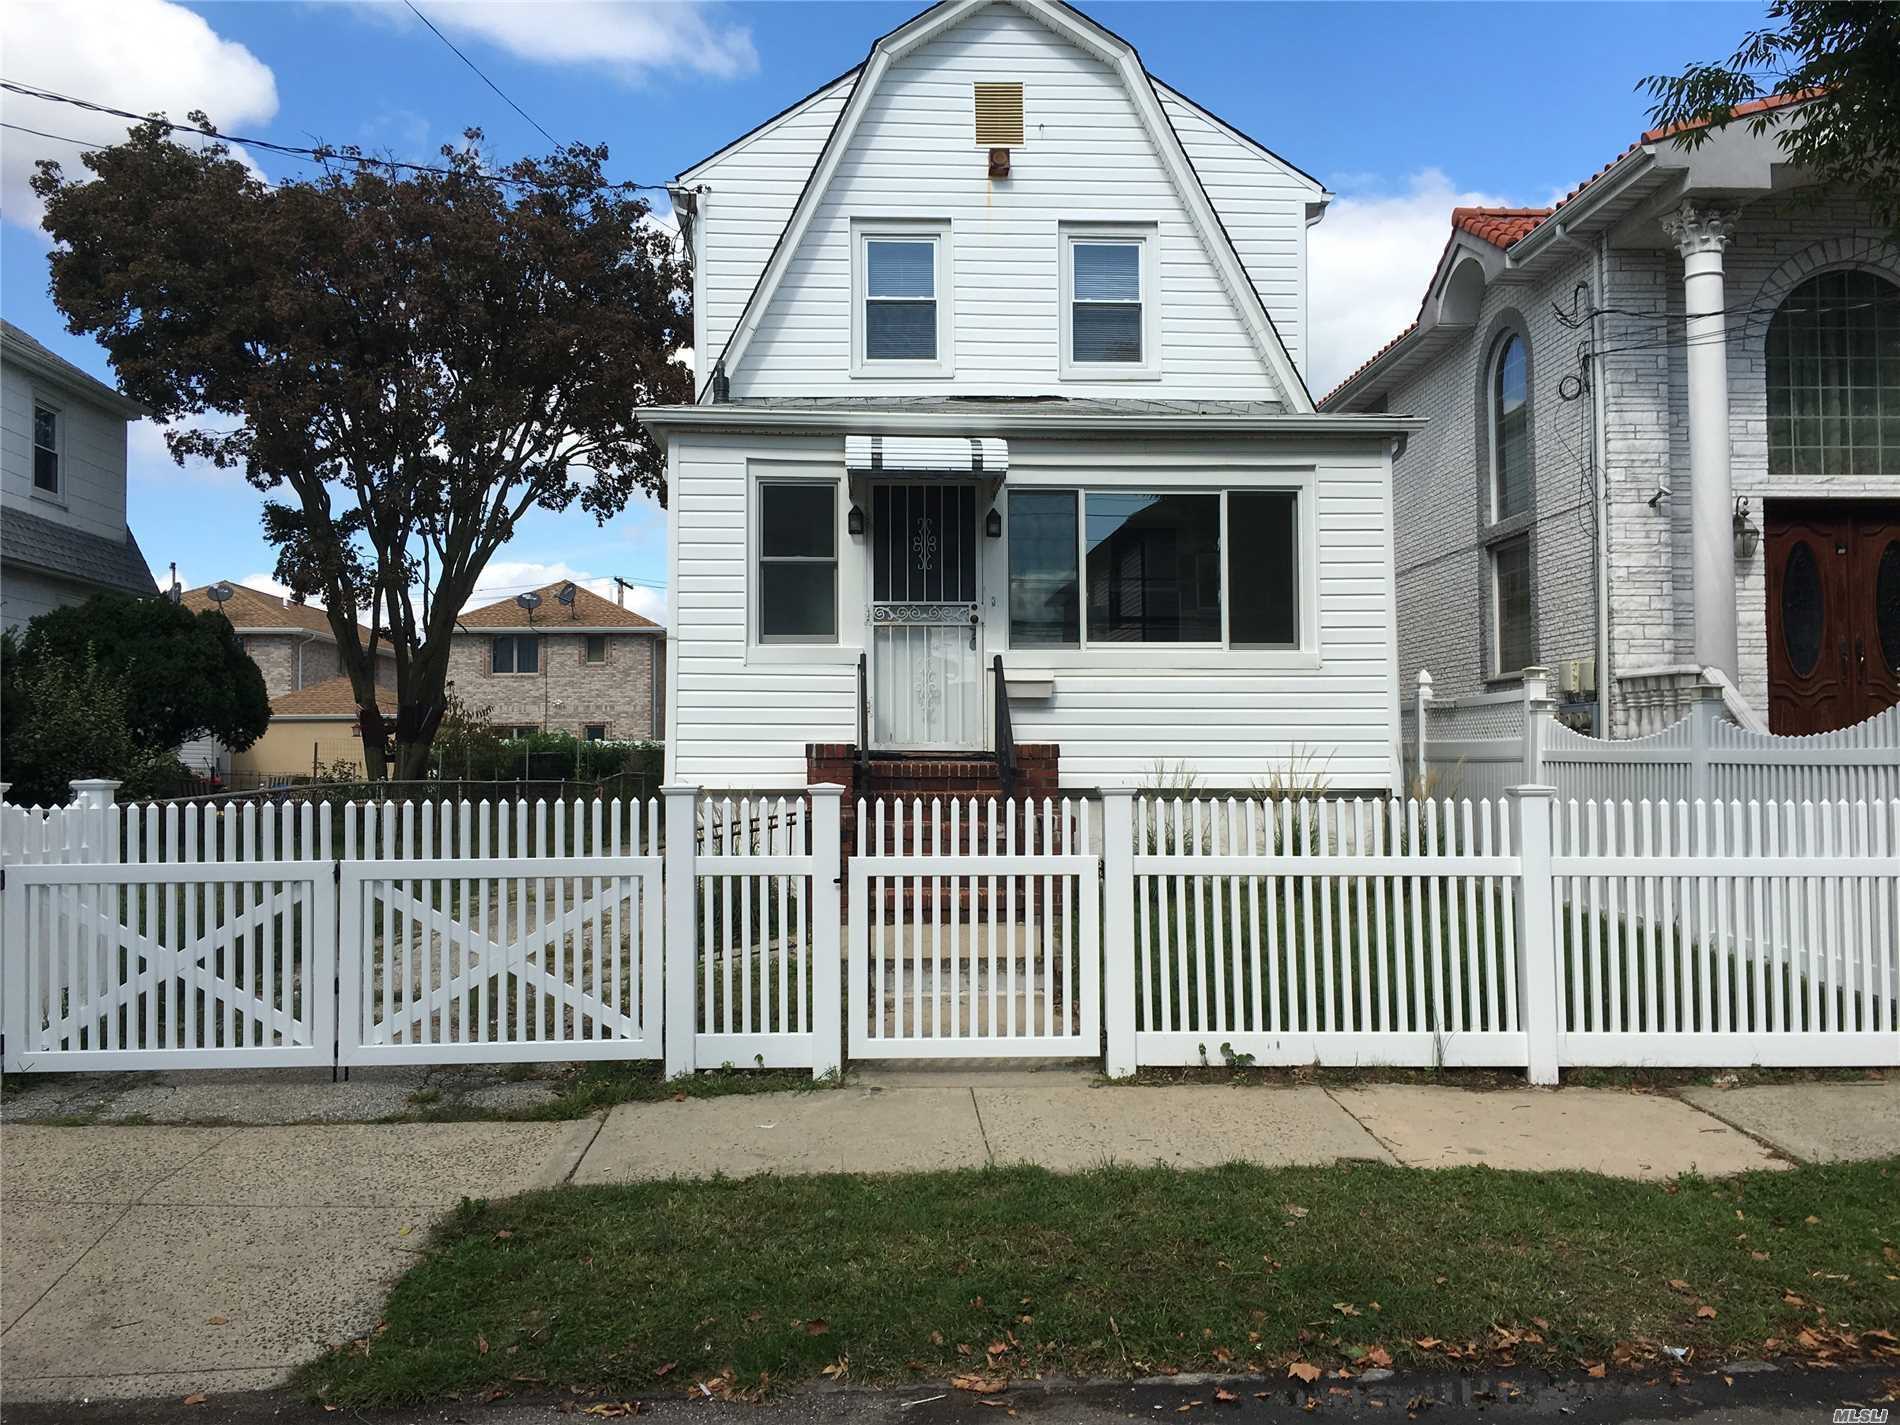 Sunny and Spacious 3 Bedroom House for Rent in the Heart of Whitestone with Enclosed Front Porch. Features Living Room, Dining Room, Renovated Eat-in-Kitchen, and 1.5 Bathrooms. Backyard and Driveway is Included. Hardwood Flooring Throughout and New Windows. Close to Shopping and Transportation